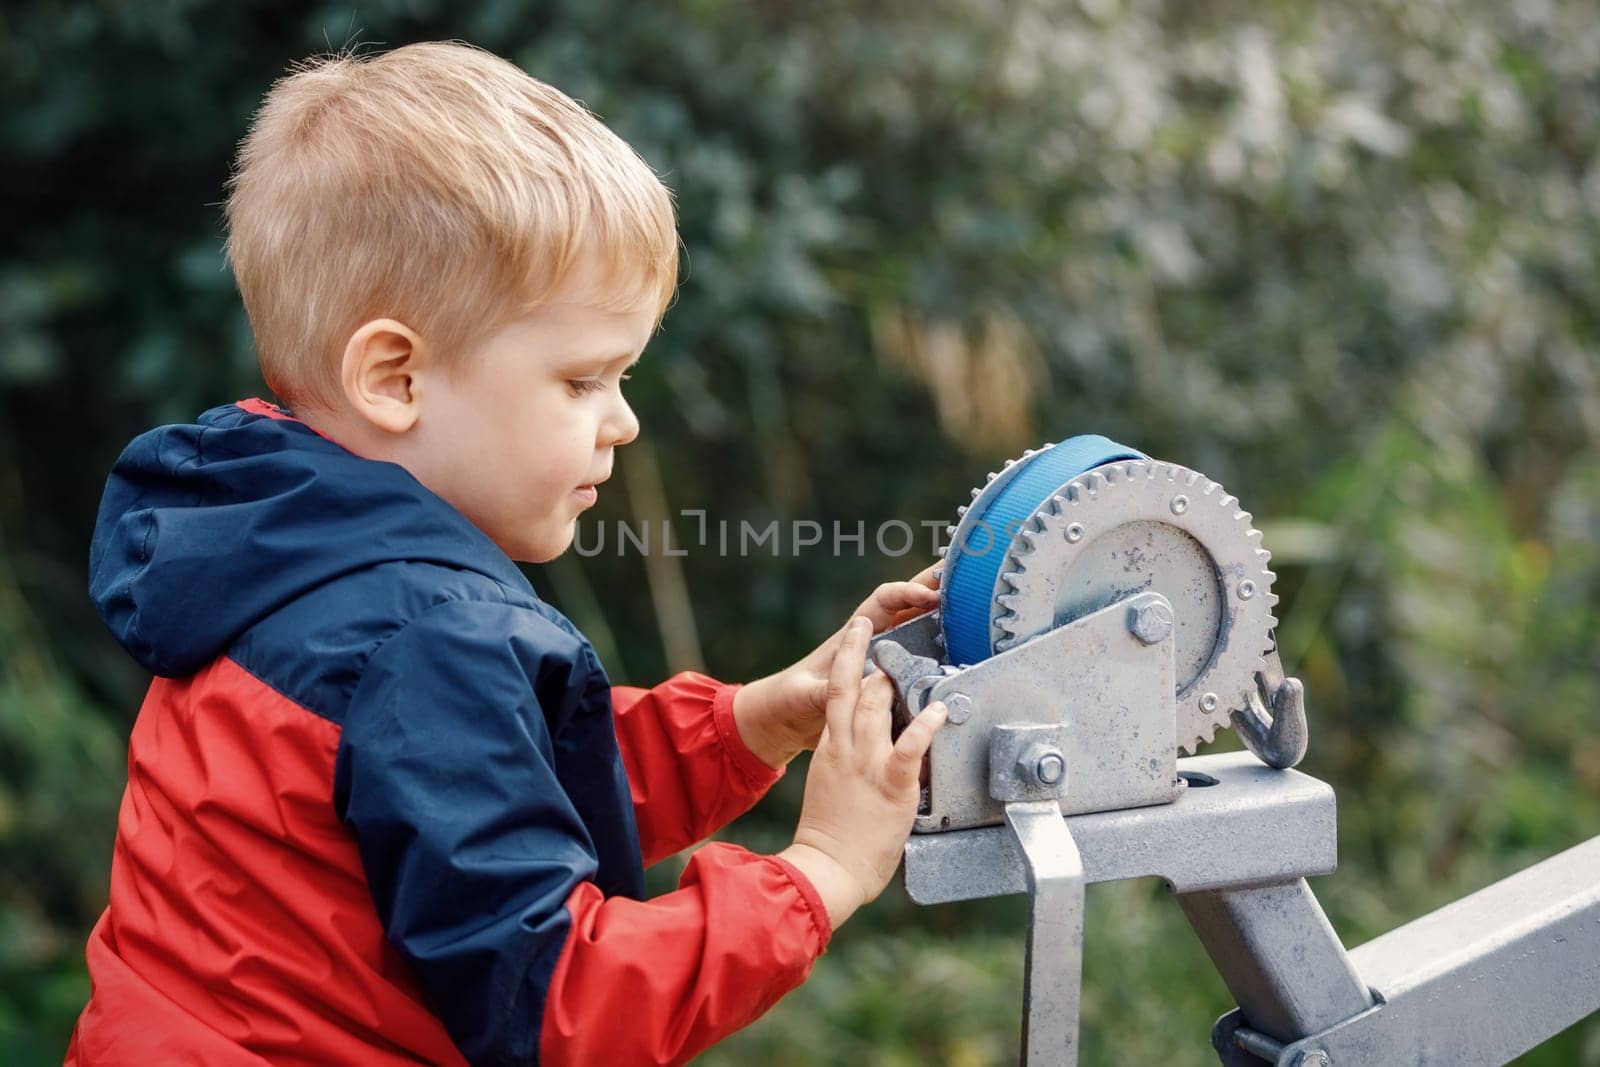 The little boy is interested in playing with boat trailer winch, boat bow rest, blue cargo strap and its pulley and gears.